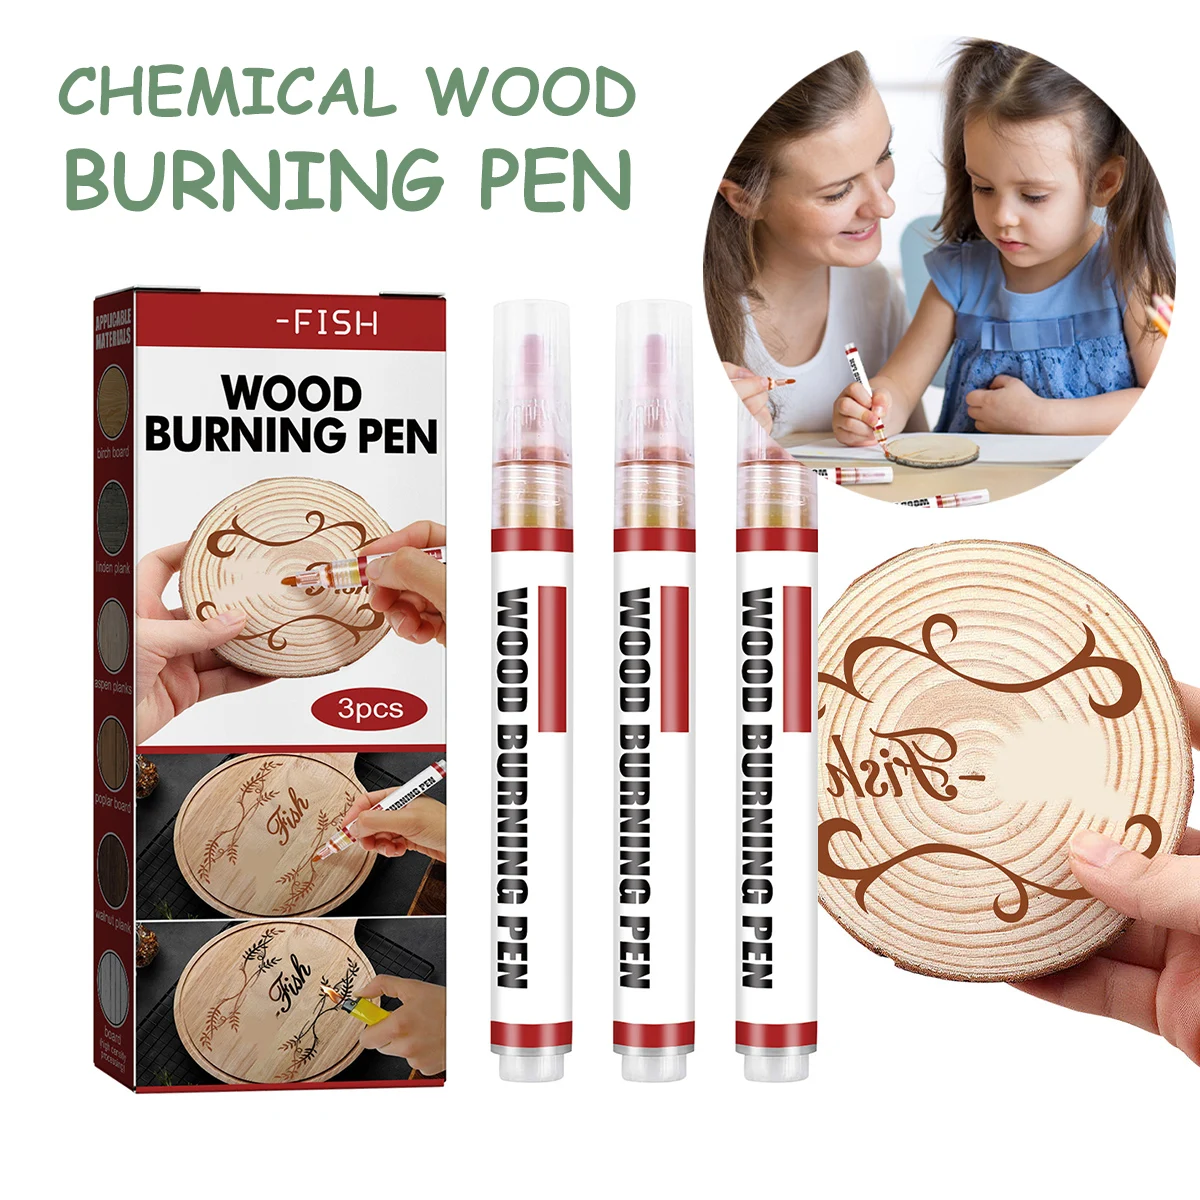 

3Pcs Wood Burning Pen Scorch Pen Chemical Wood Burning Pen For Project Painting DIY Pyrography Caramel Marker Hand Tools Set